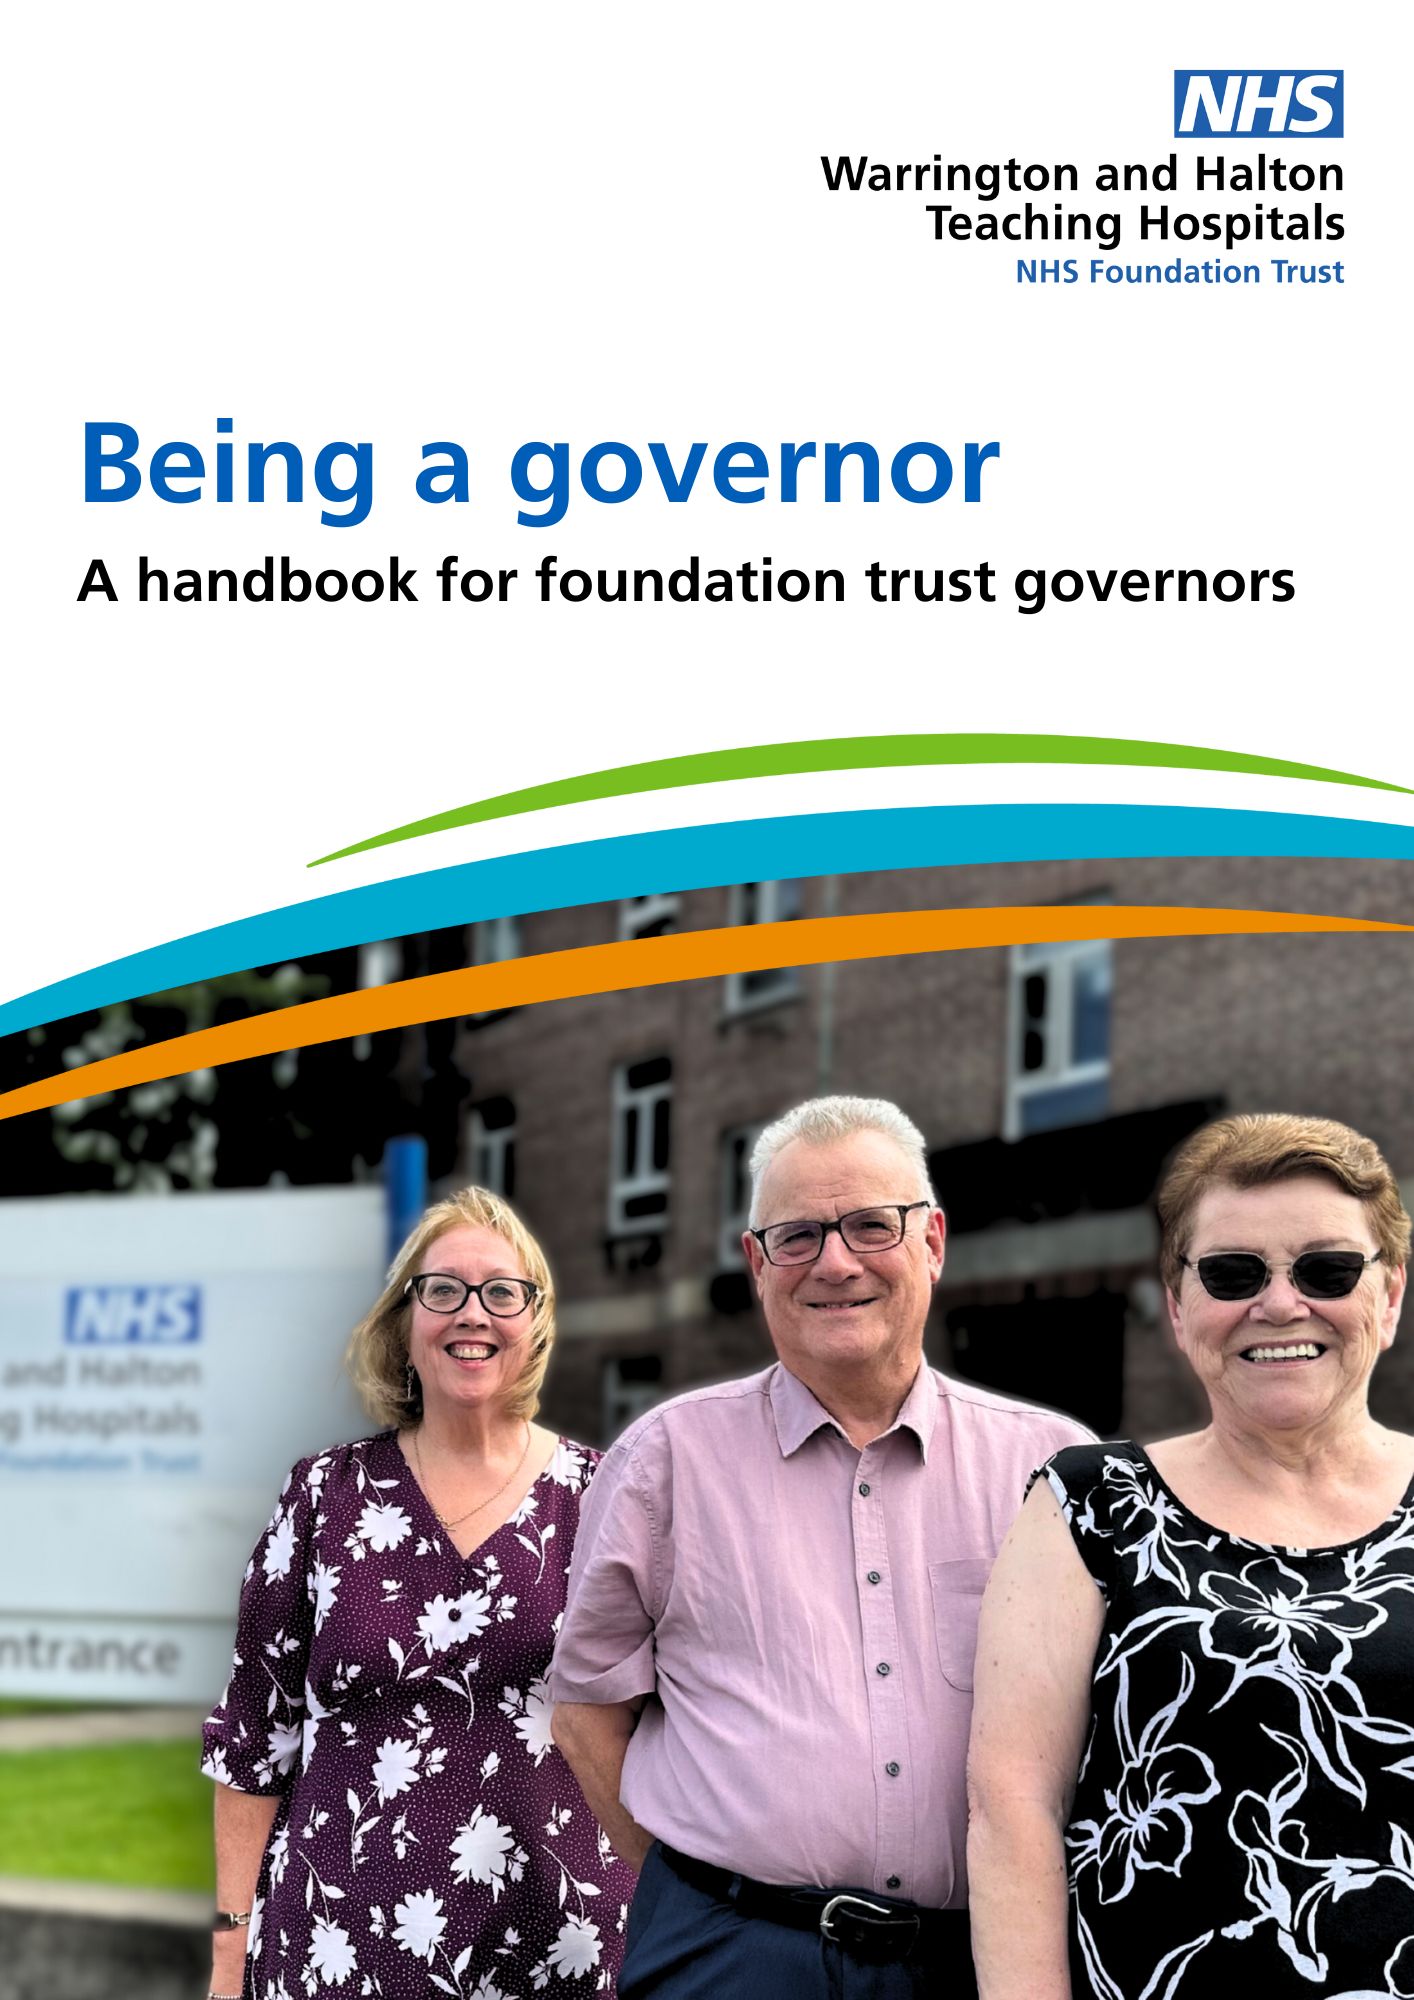 Image of the front cover of our 'Being a Governor' handbookj